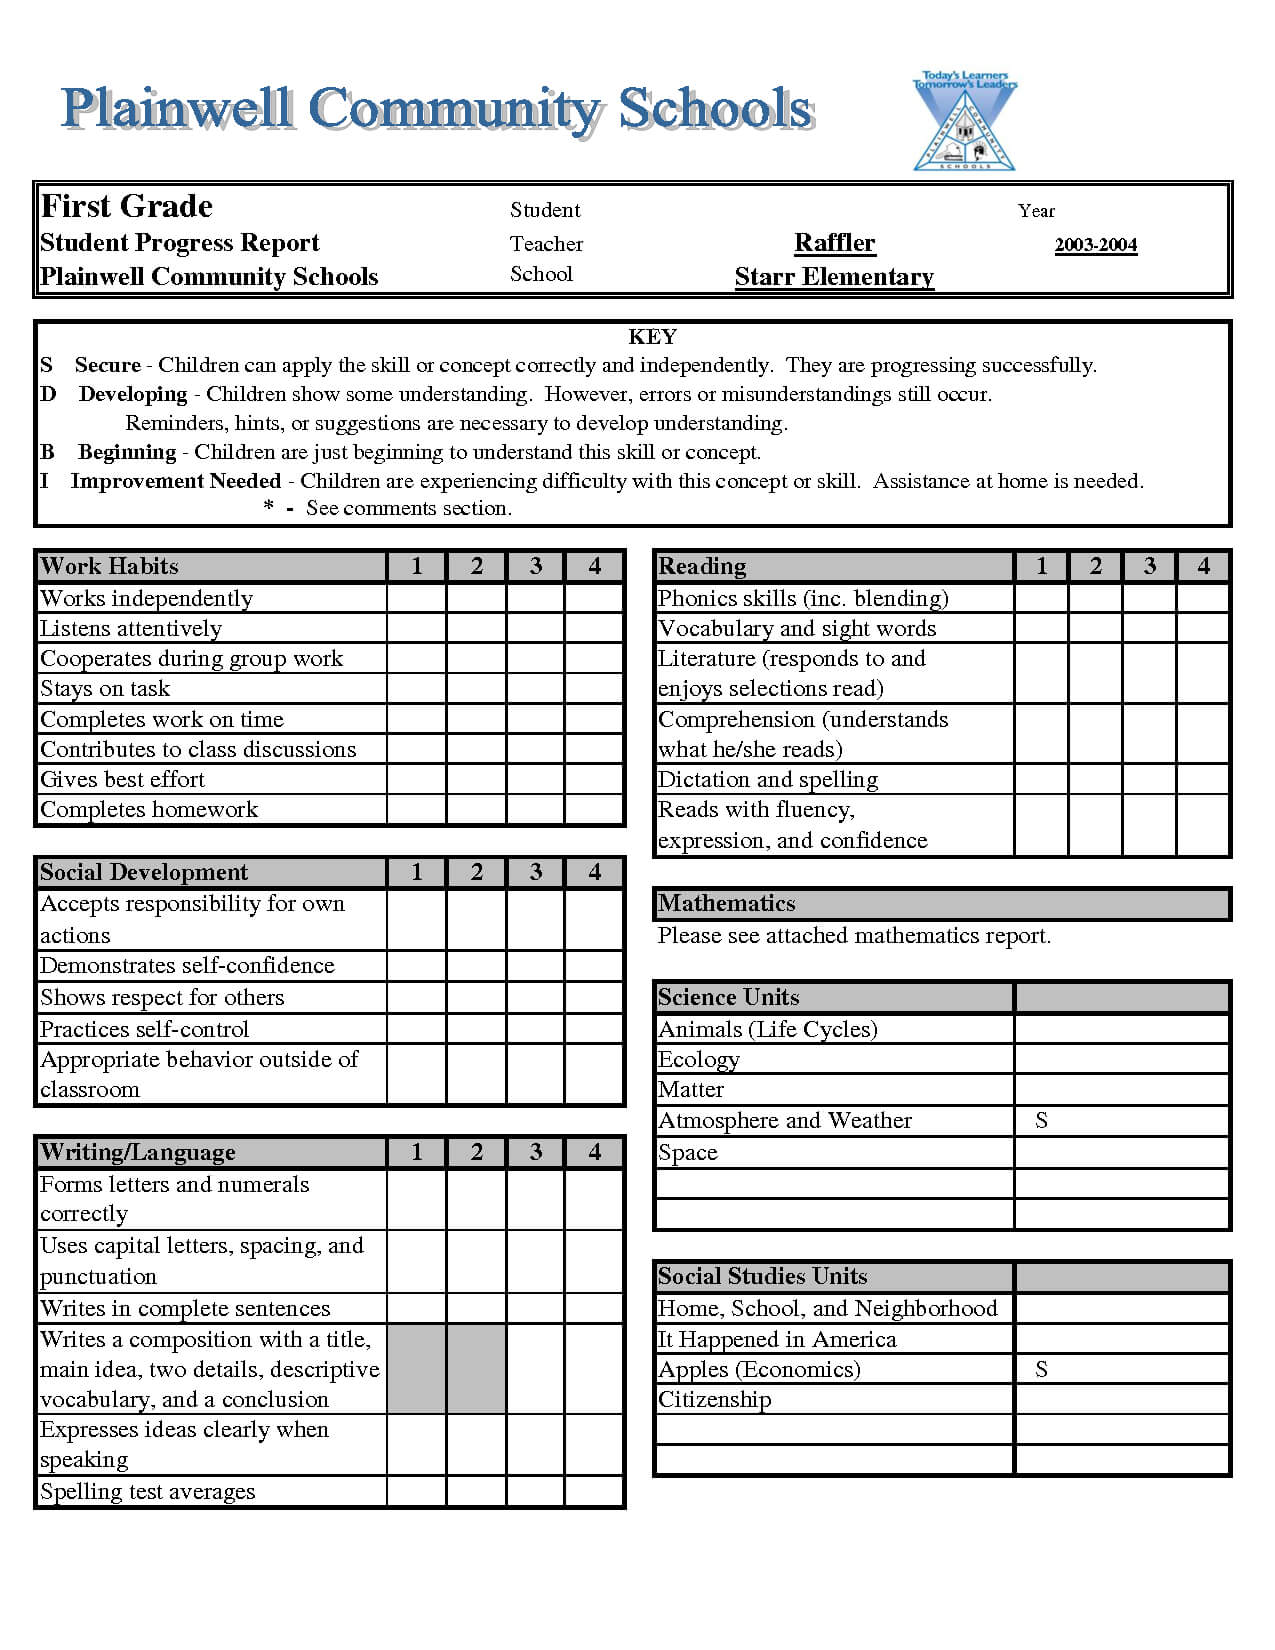 Report Card Template - Excel.xls Download Legal Documents With Regard To High School Report Card Template